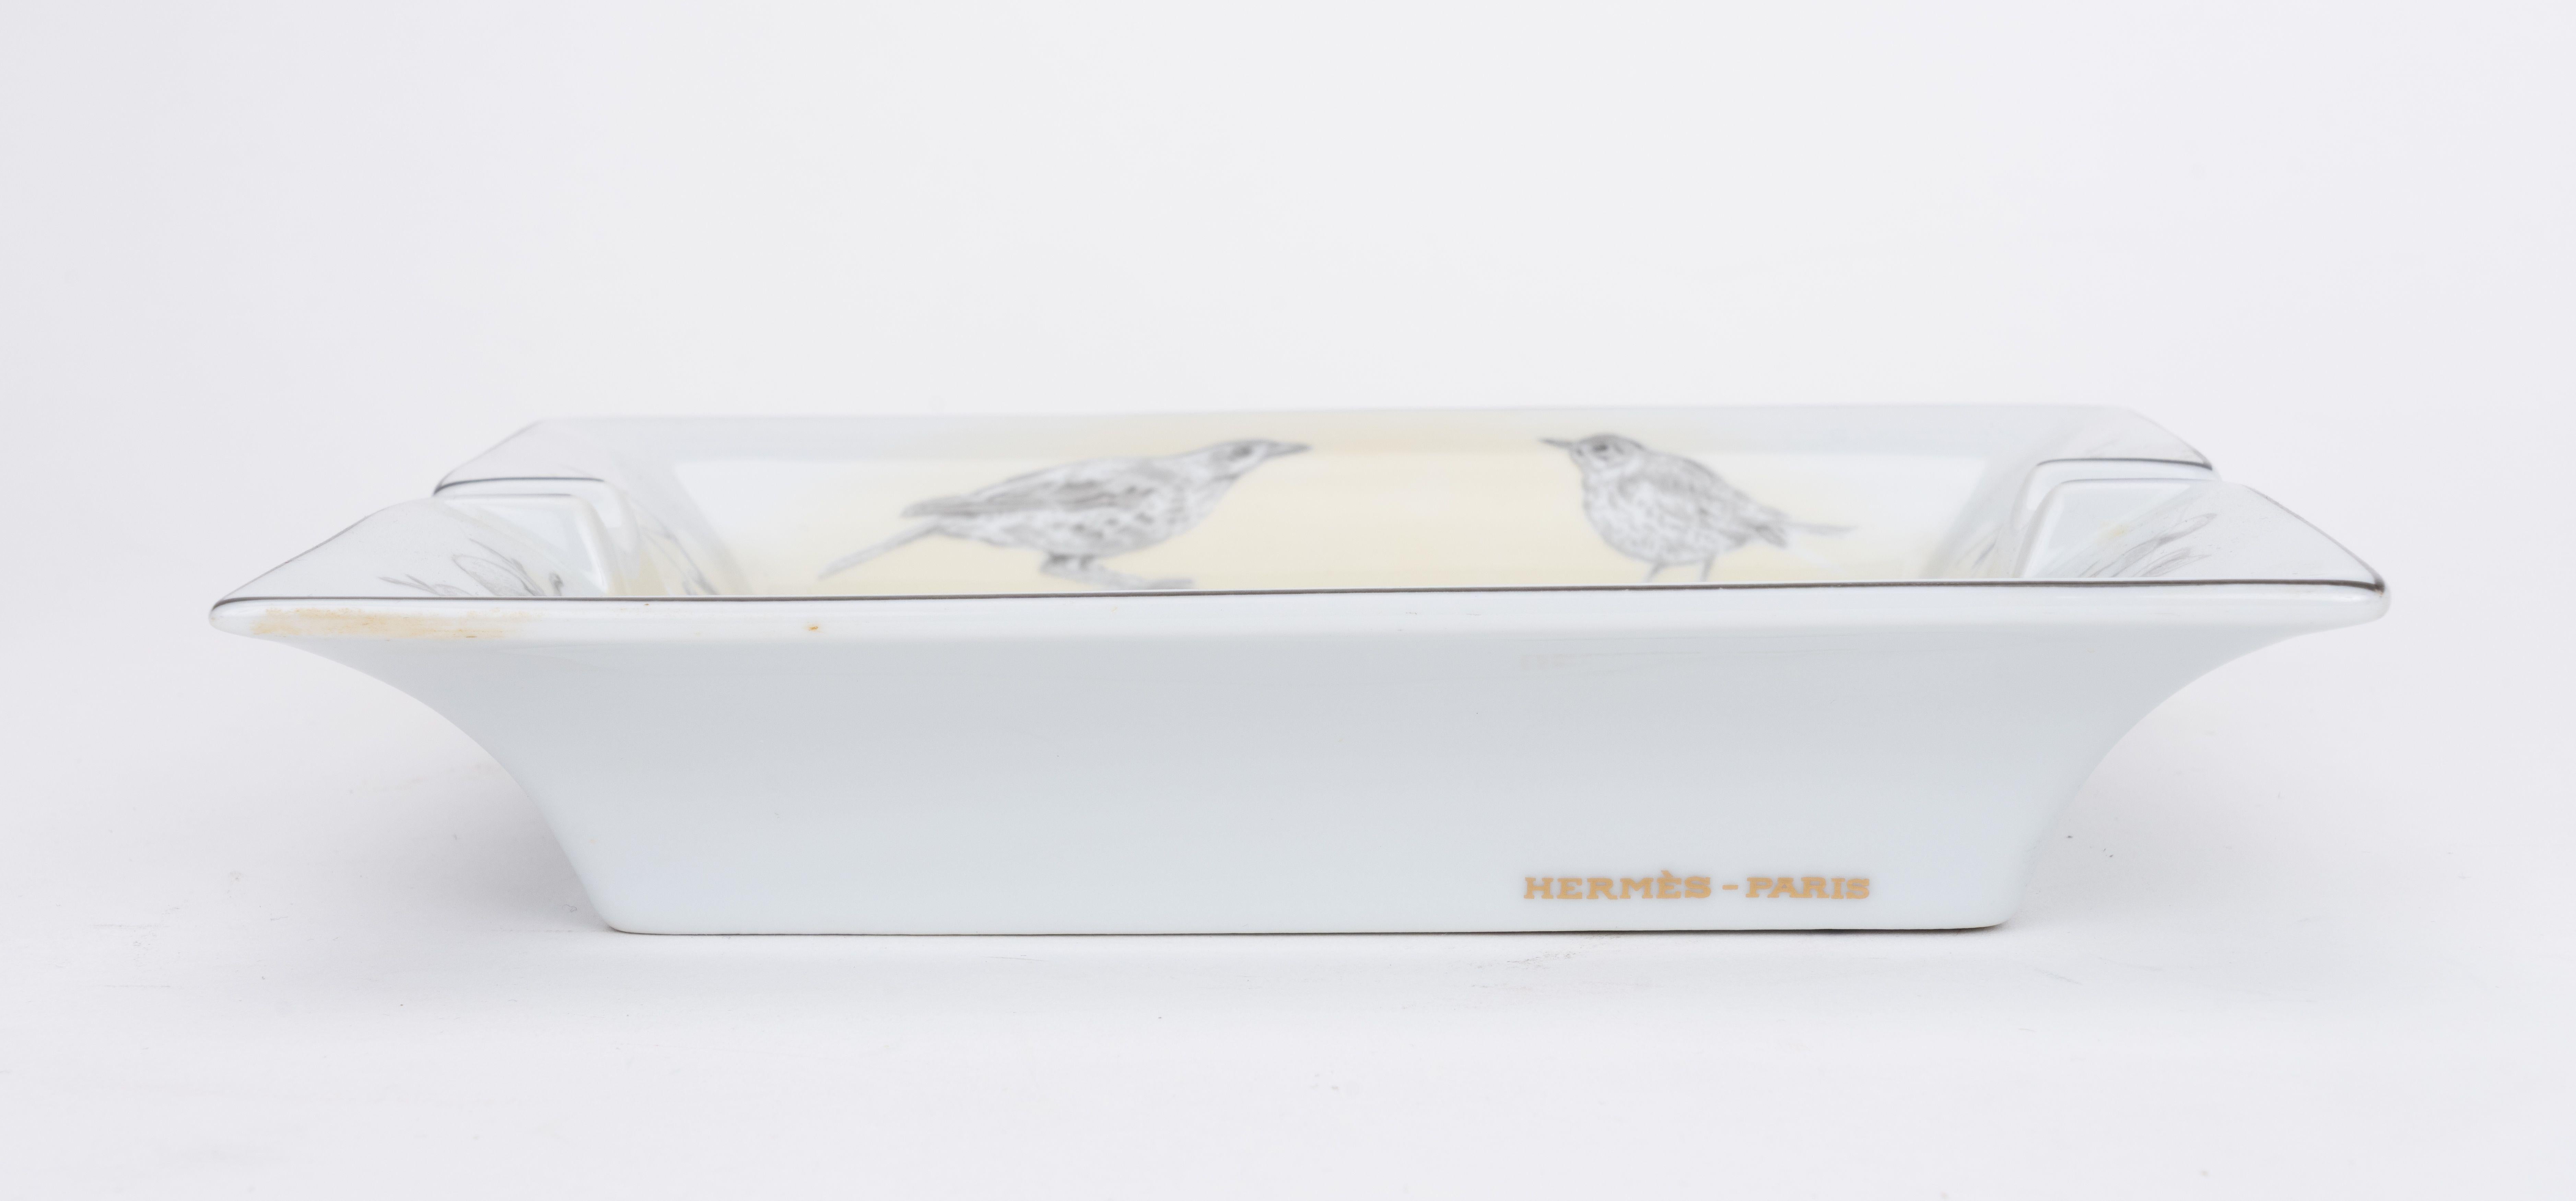 Hermès grey and white porcelain ashtray with wild birds design. Minor wear on back suede.